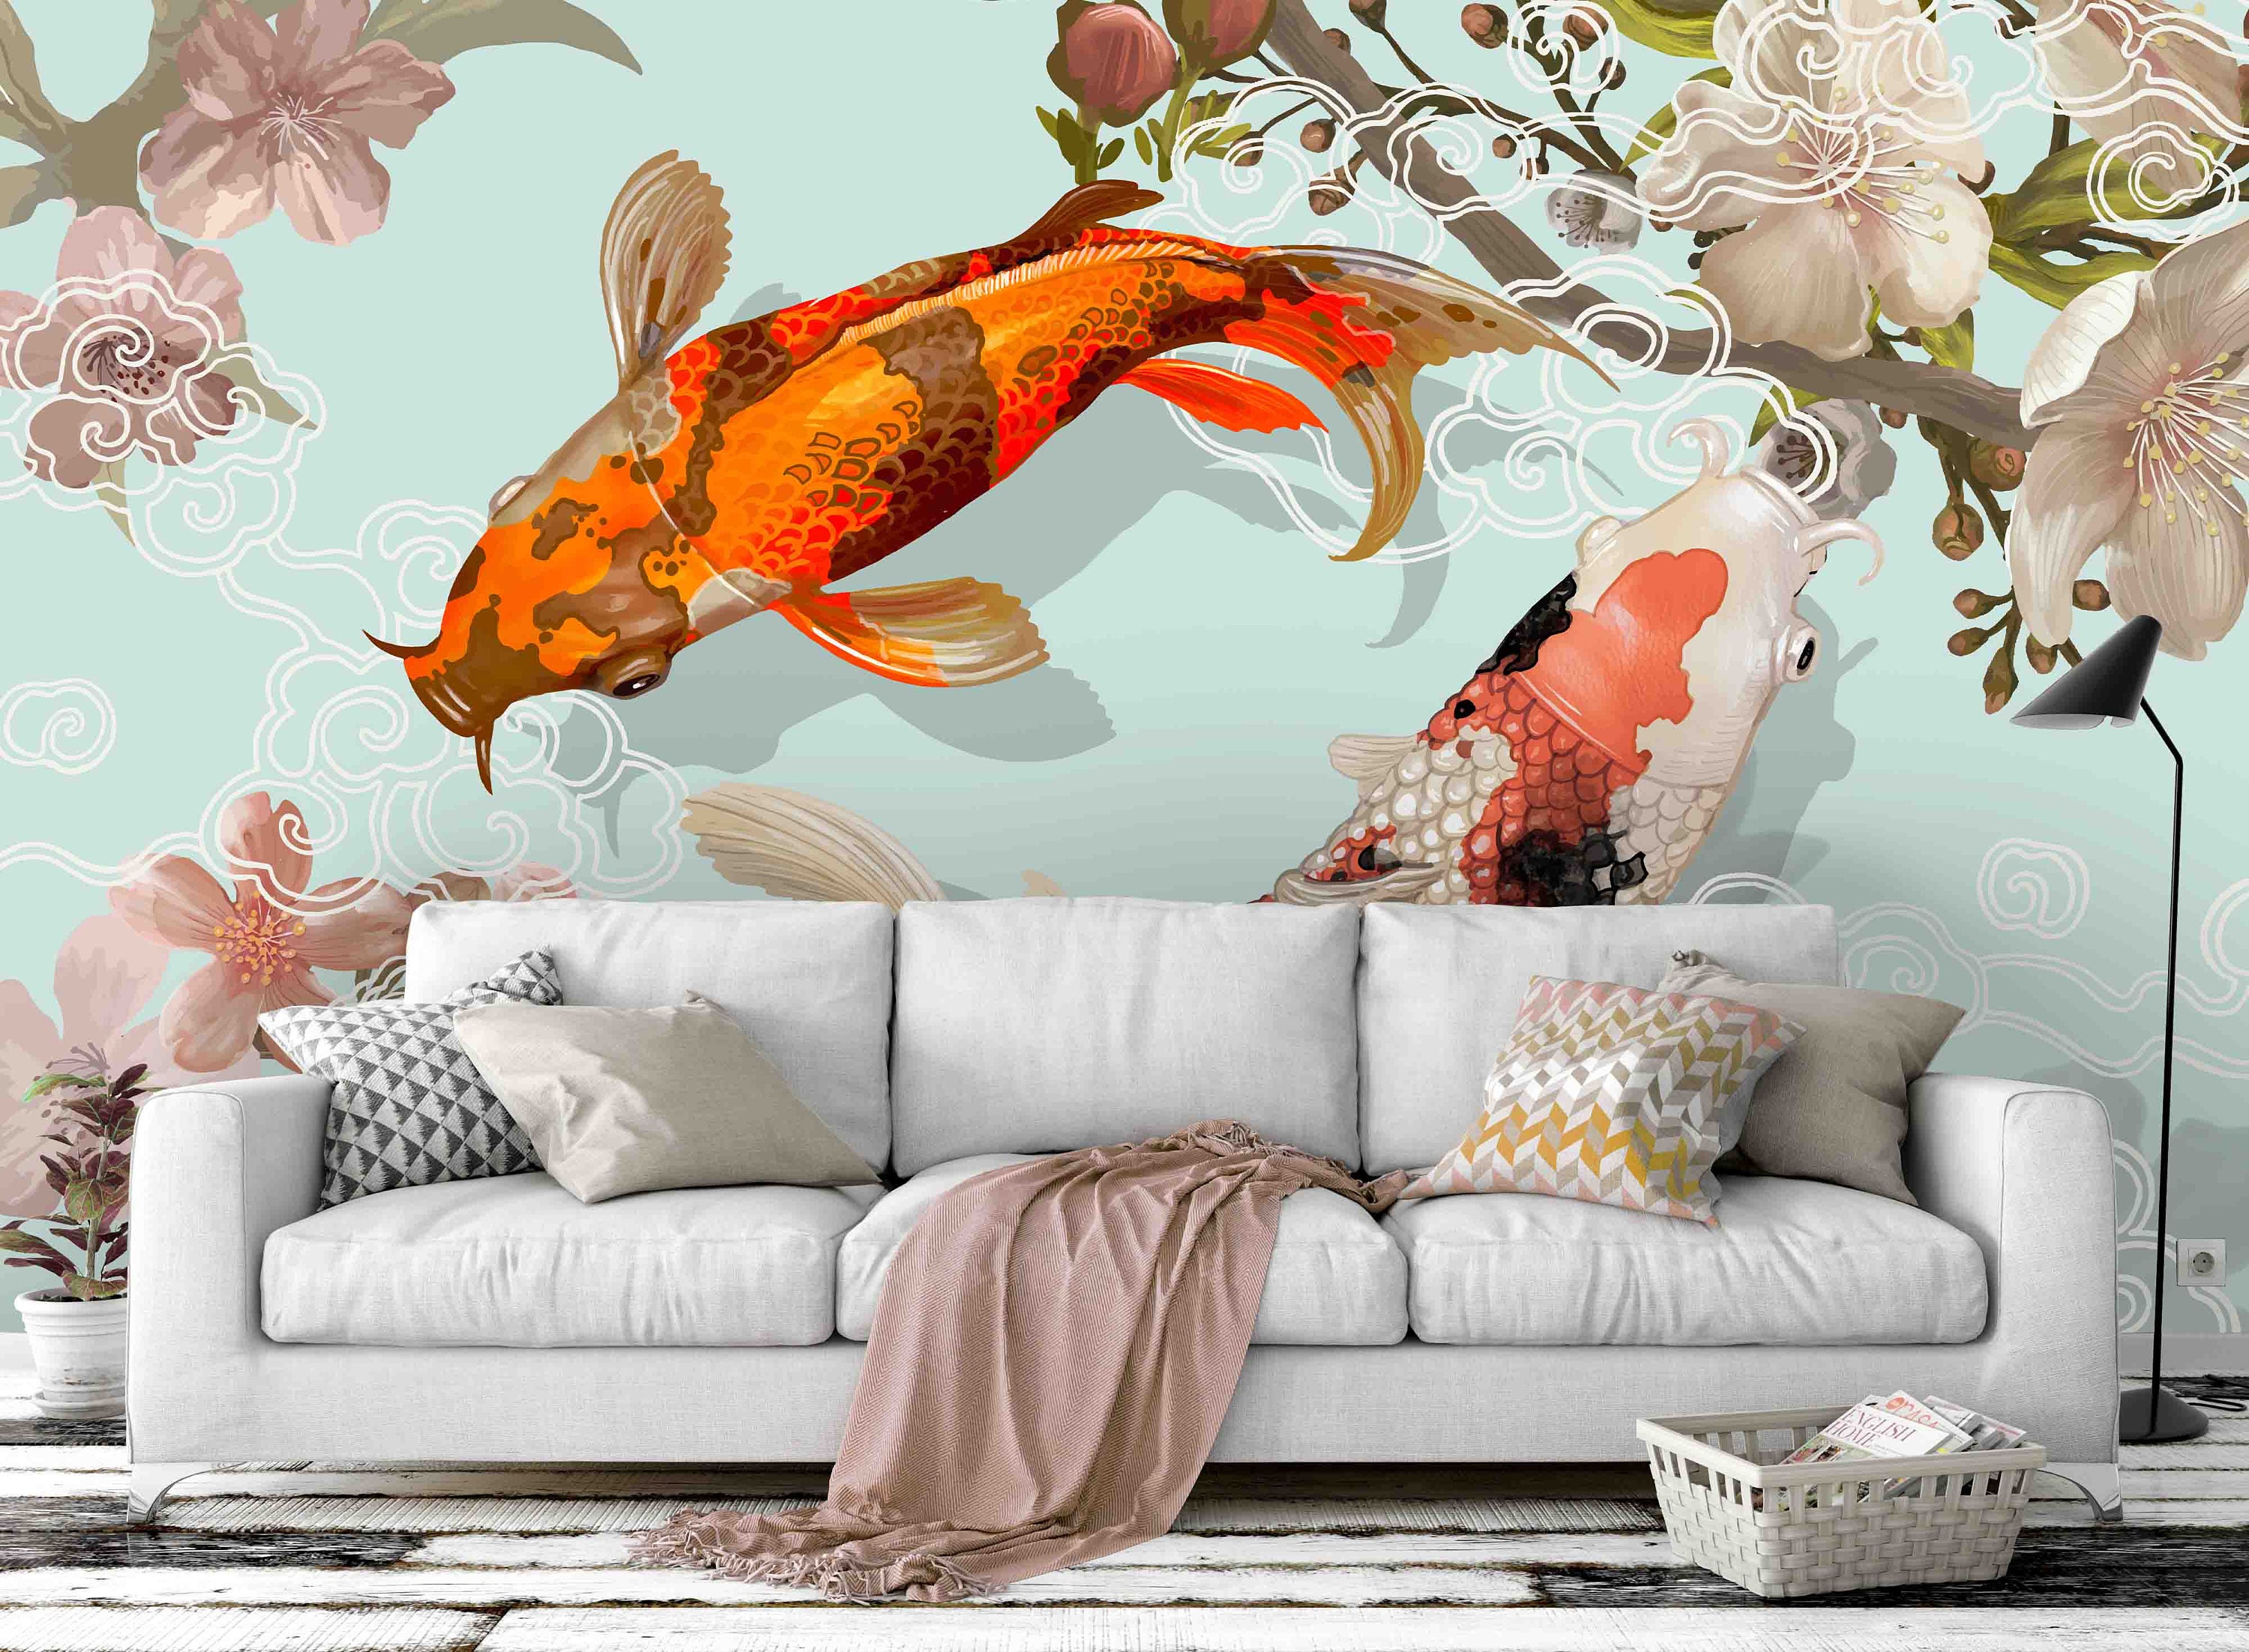 3d Koi Fish Wallpaper Mural Peel And Stick Removable